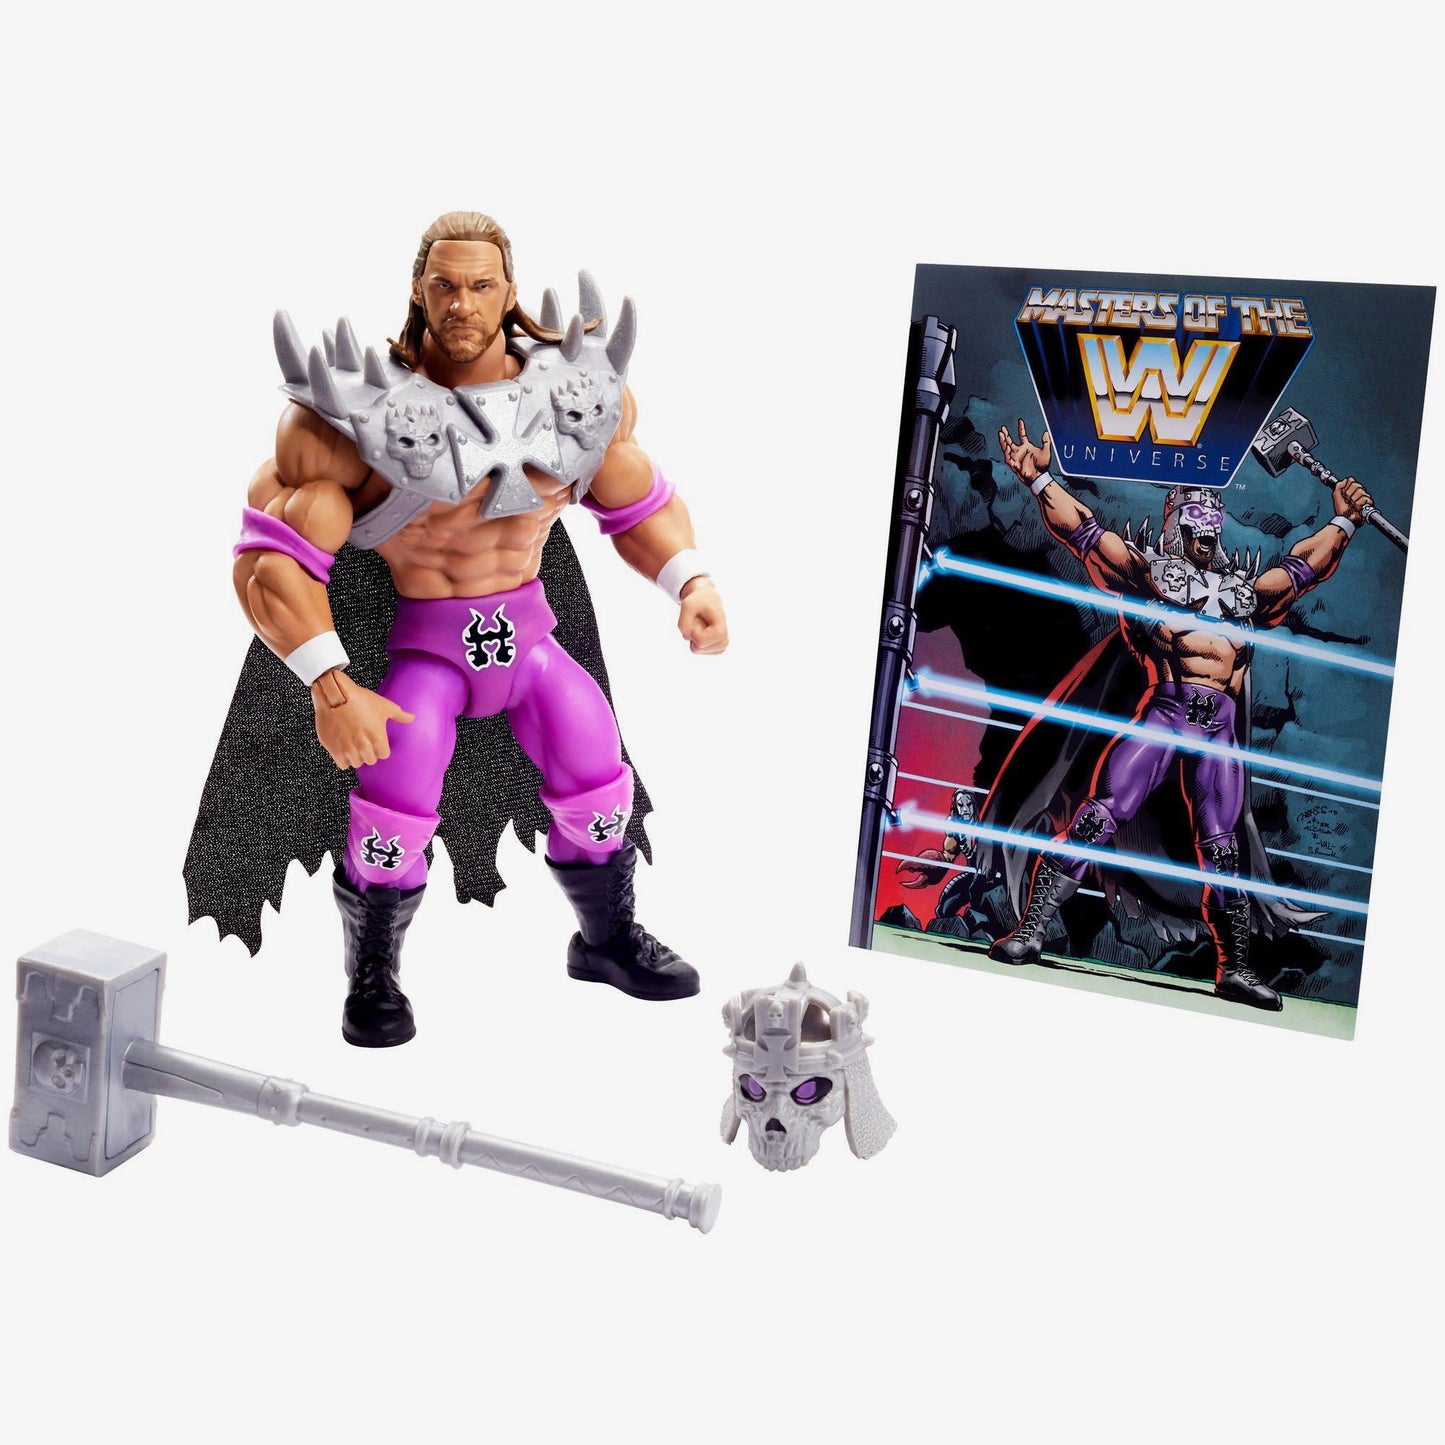 Triple H - Masters of the WWE Universe Series #1